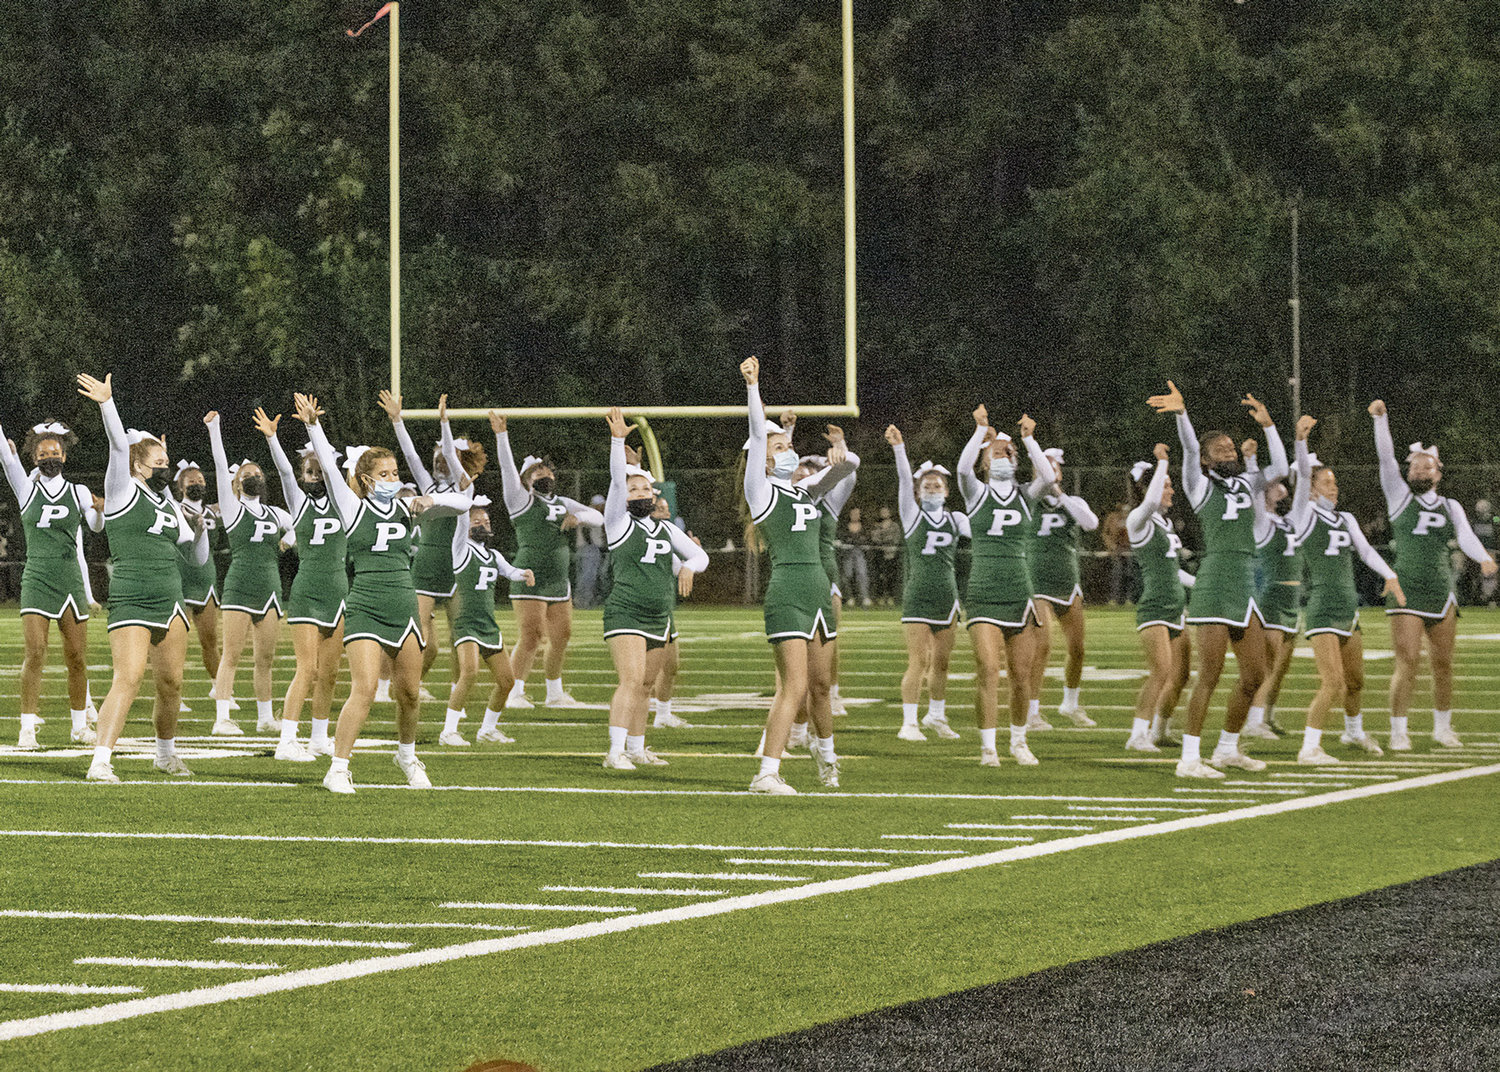 What's a football game without the cheerleading team?